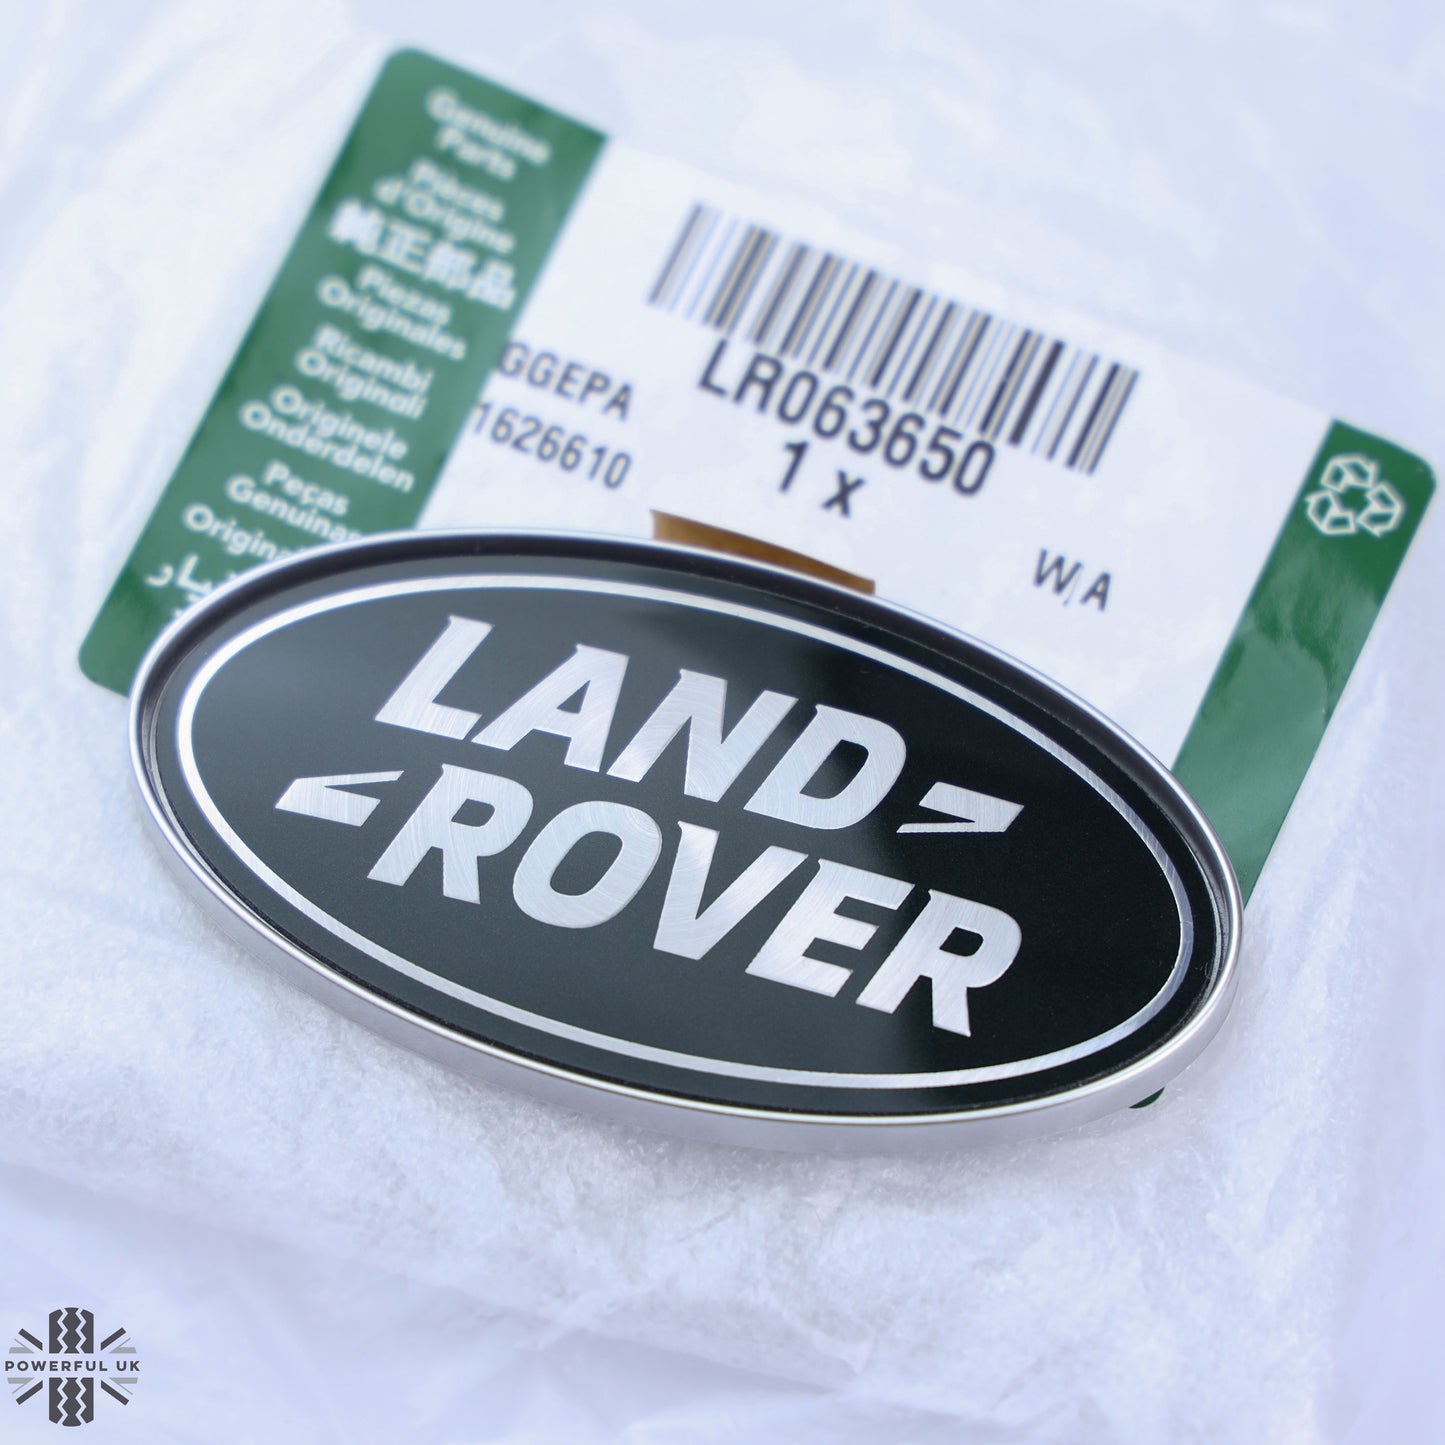 1x Genuine C Pillar Oval Badge for Land Rover Discovery 5